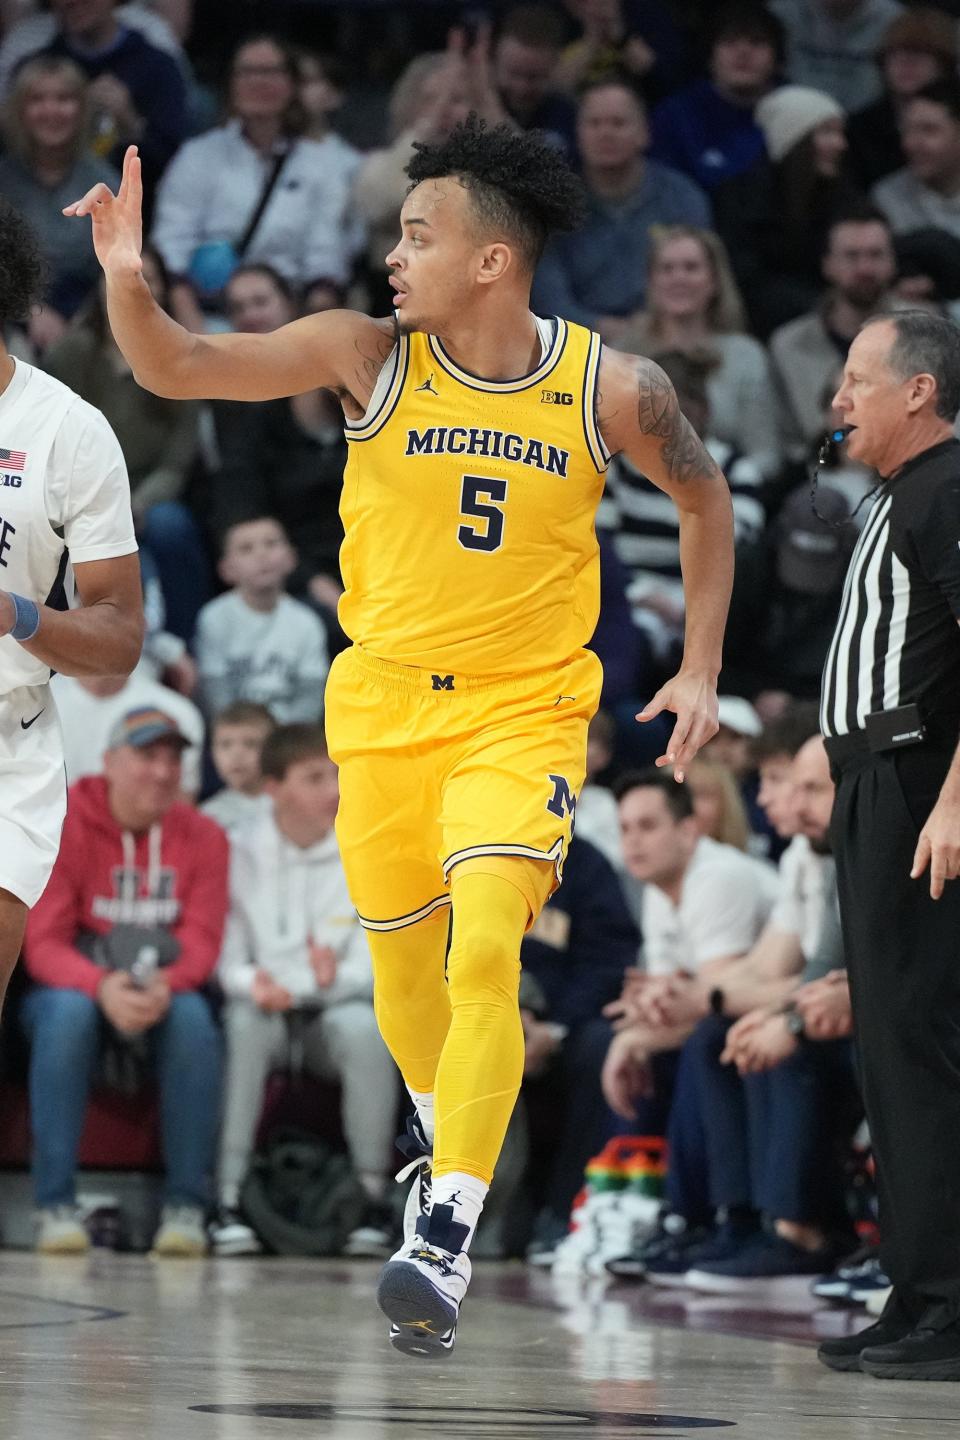 Terrance Williams II of the Michigan Wolverines celebrates a shot against the Penn State Nittany Lions in the first half at the Palestra on Jan. 7, 2024, in Philadelphia, Pa.